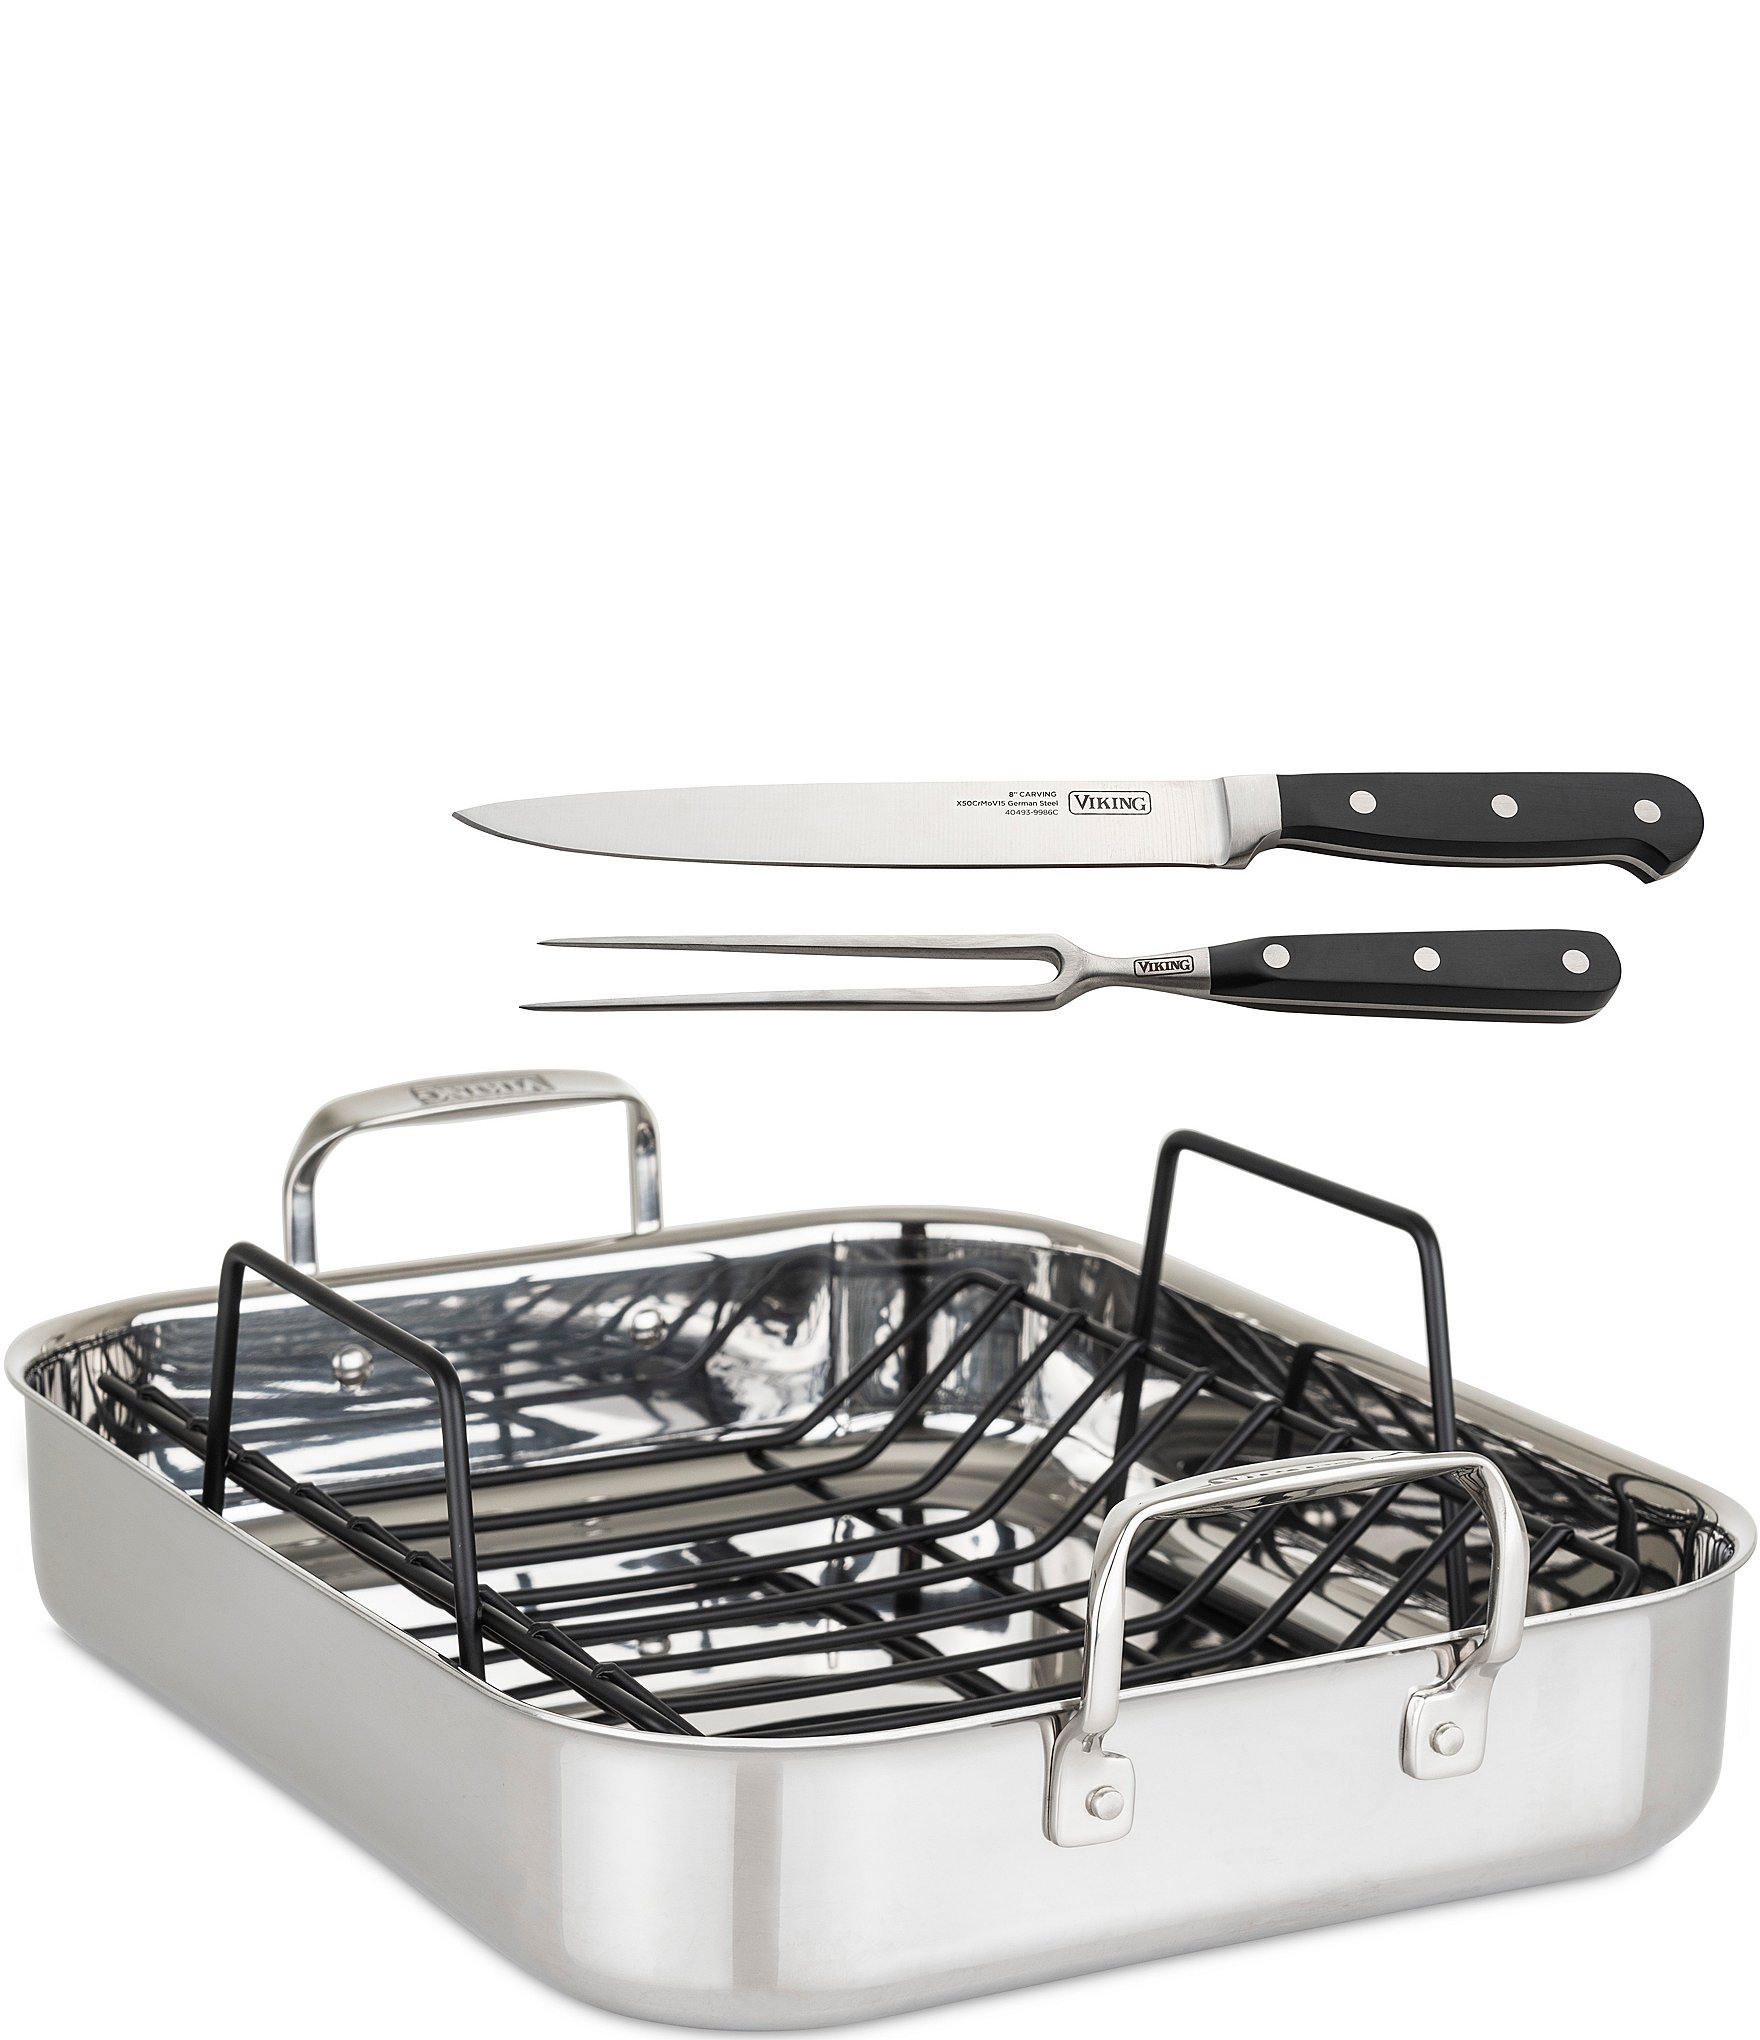 https://dimg.dillards.com/is/image/DillardsZoom/zoom/viking-3-ply-mirror-stainless-steel-16-roasting-pan-with-non-stick-rack-and-carving-set/20118357_zi.jpg